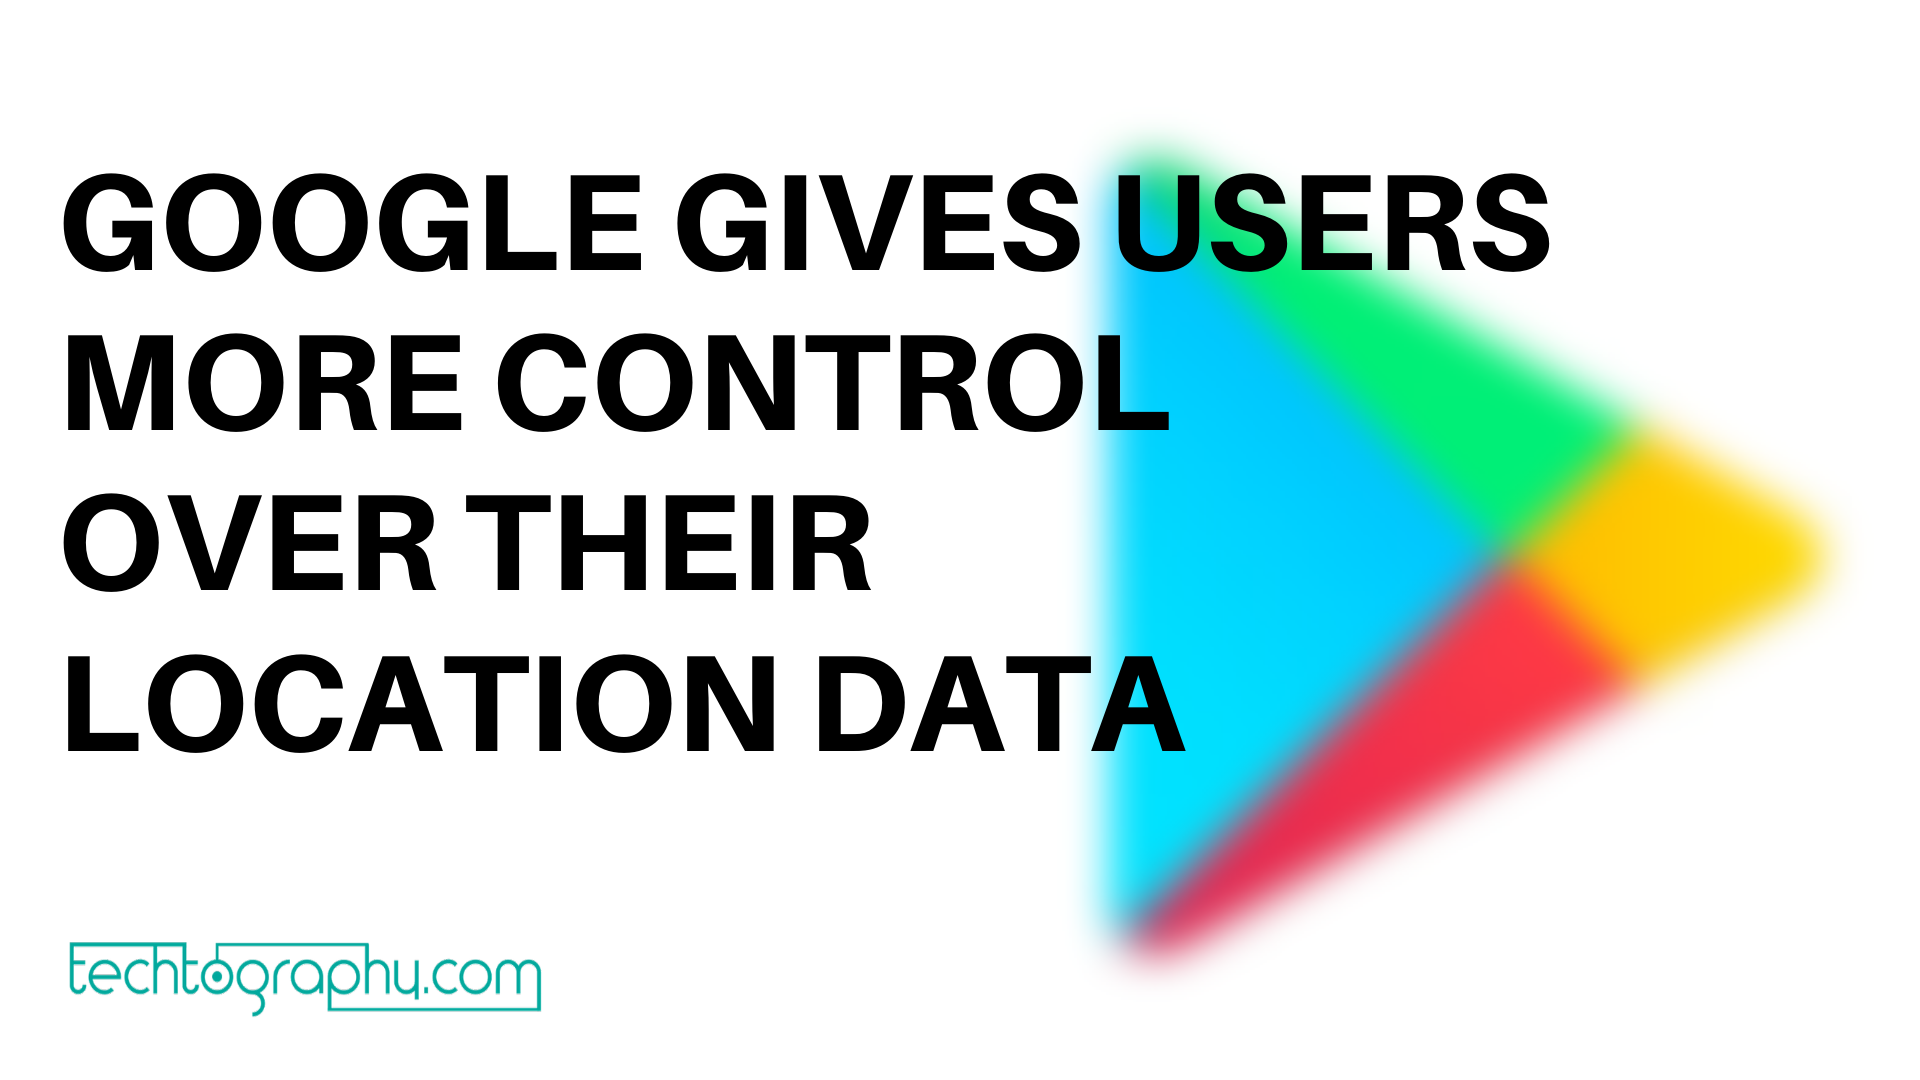 Google gives users more control over their location data